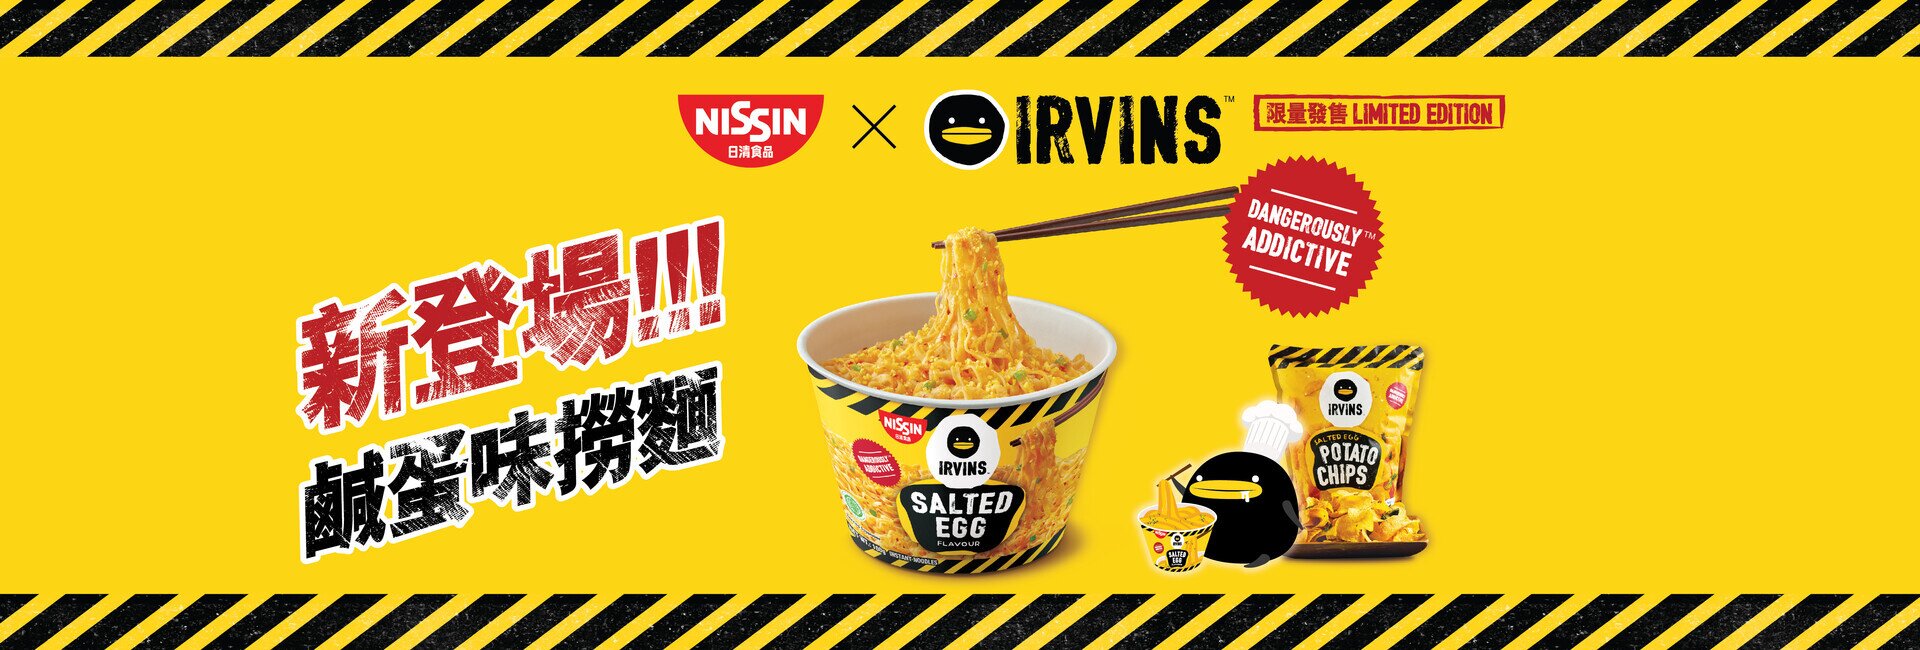 Dangerously AdditiveTM Nissin and IRVINS collaboration to launch Salted Egg Flavour Stir Noodle